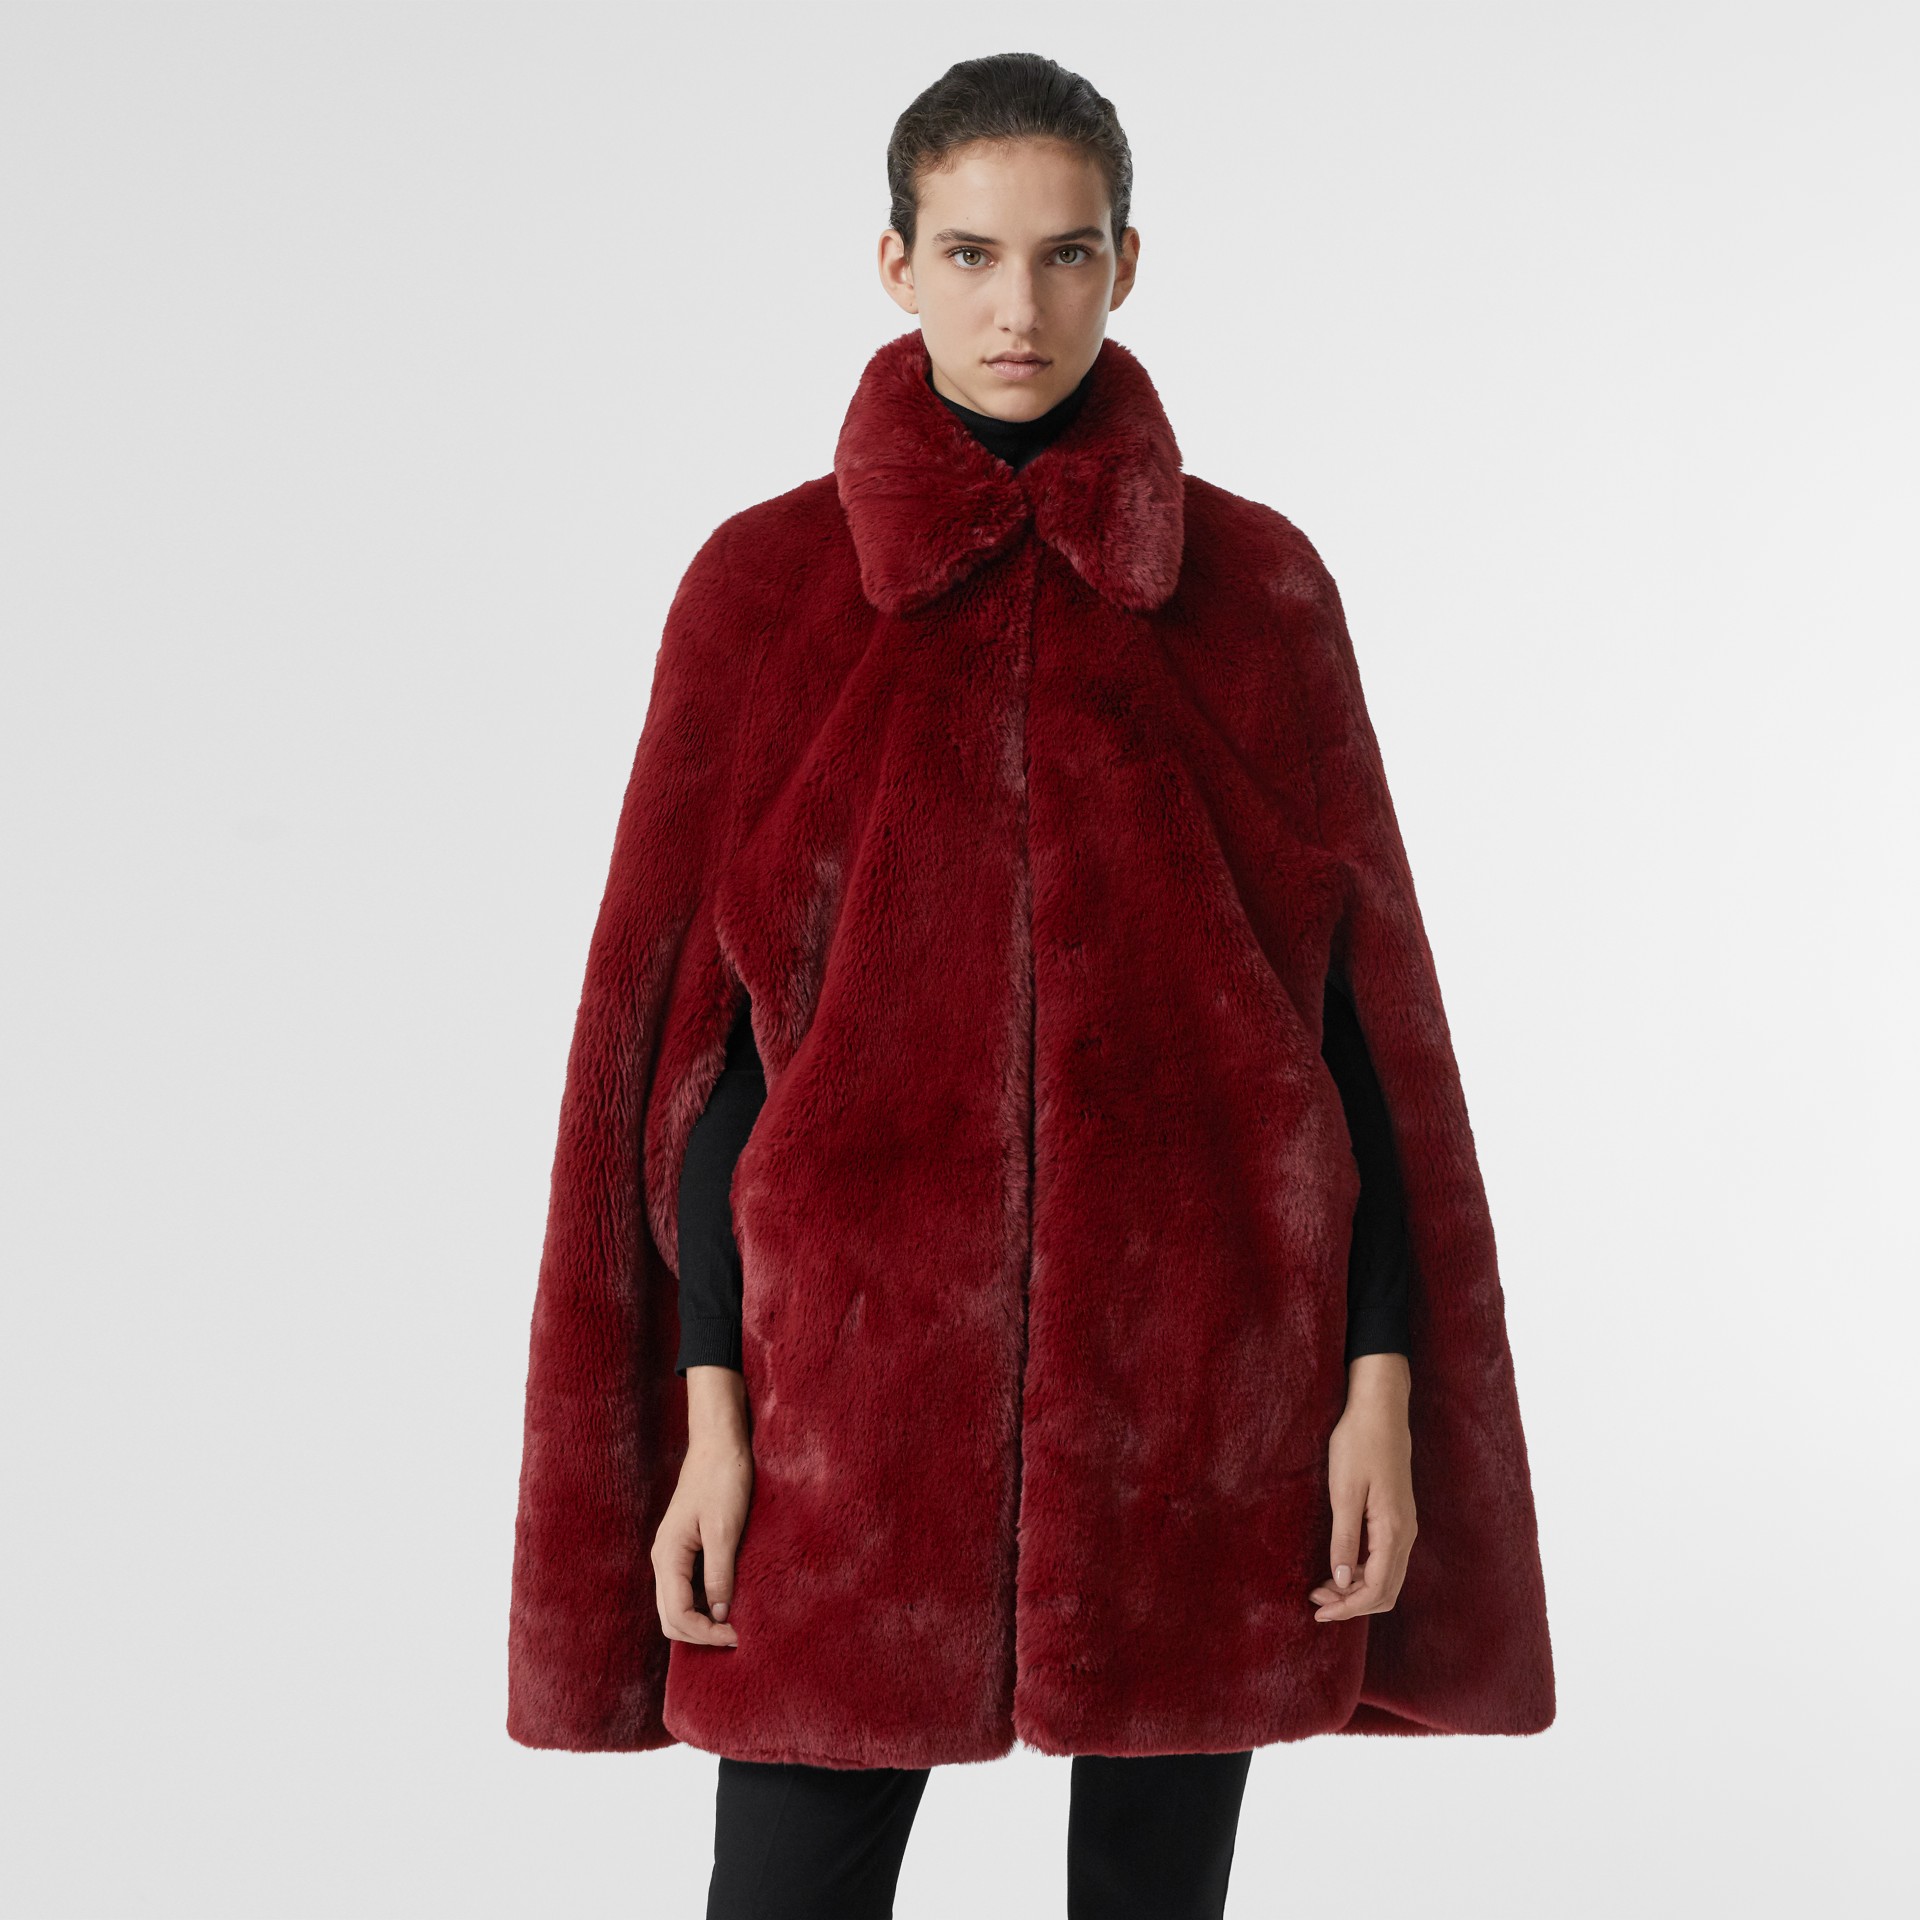 Faux Fur Cape in Burgundy - Women | Burberry United States